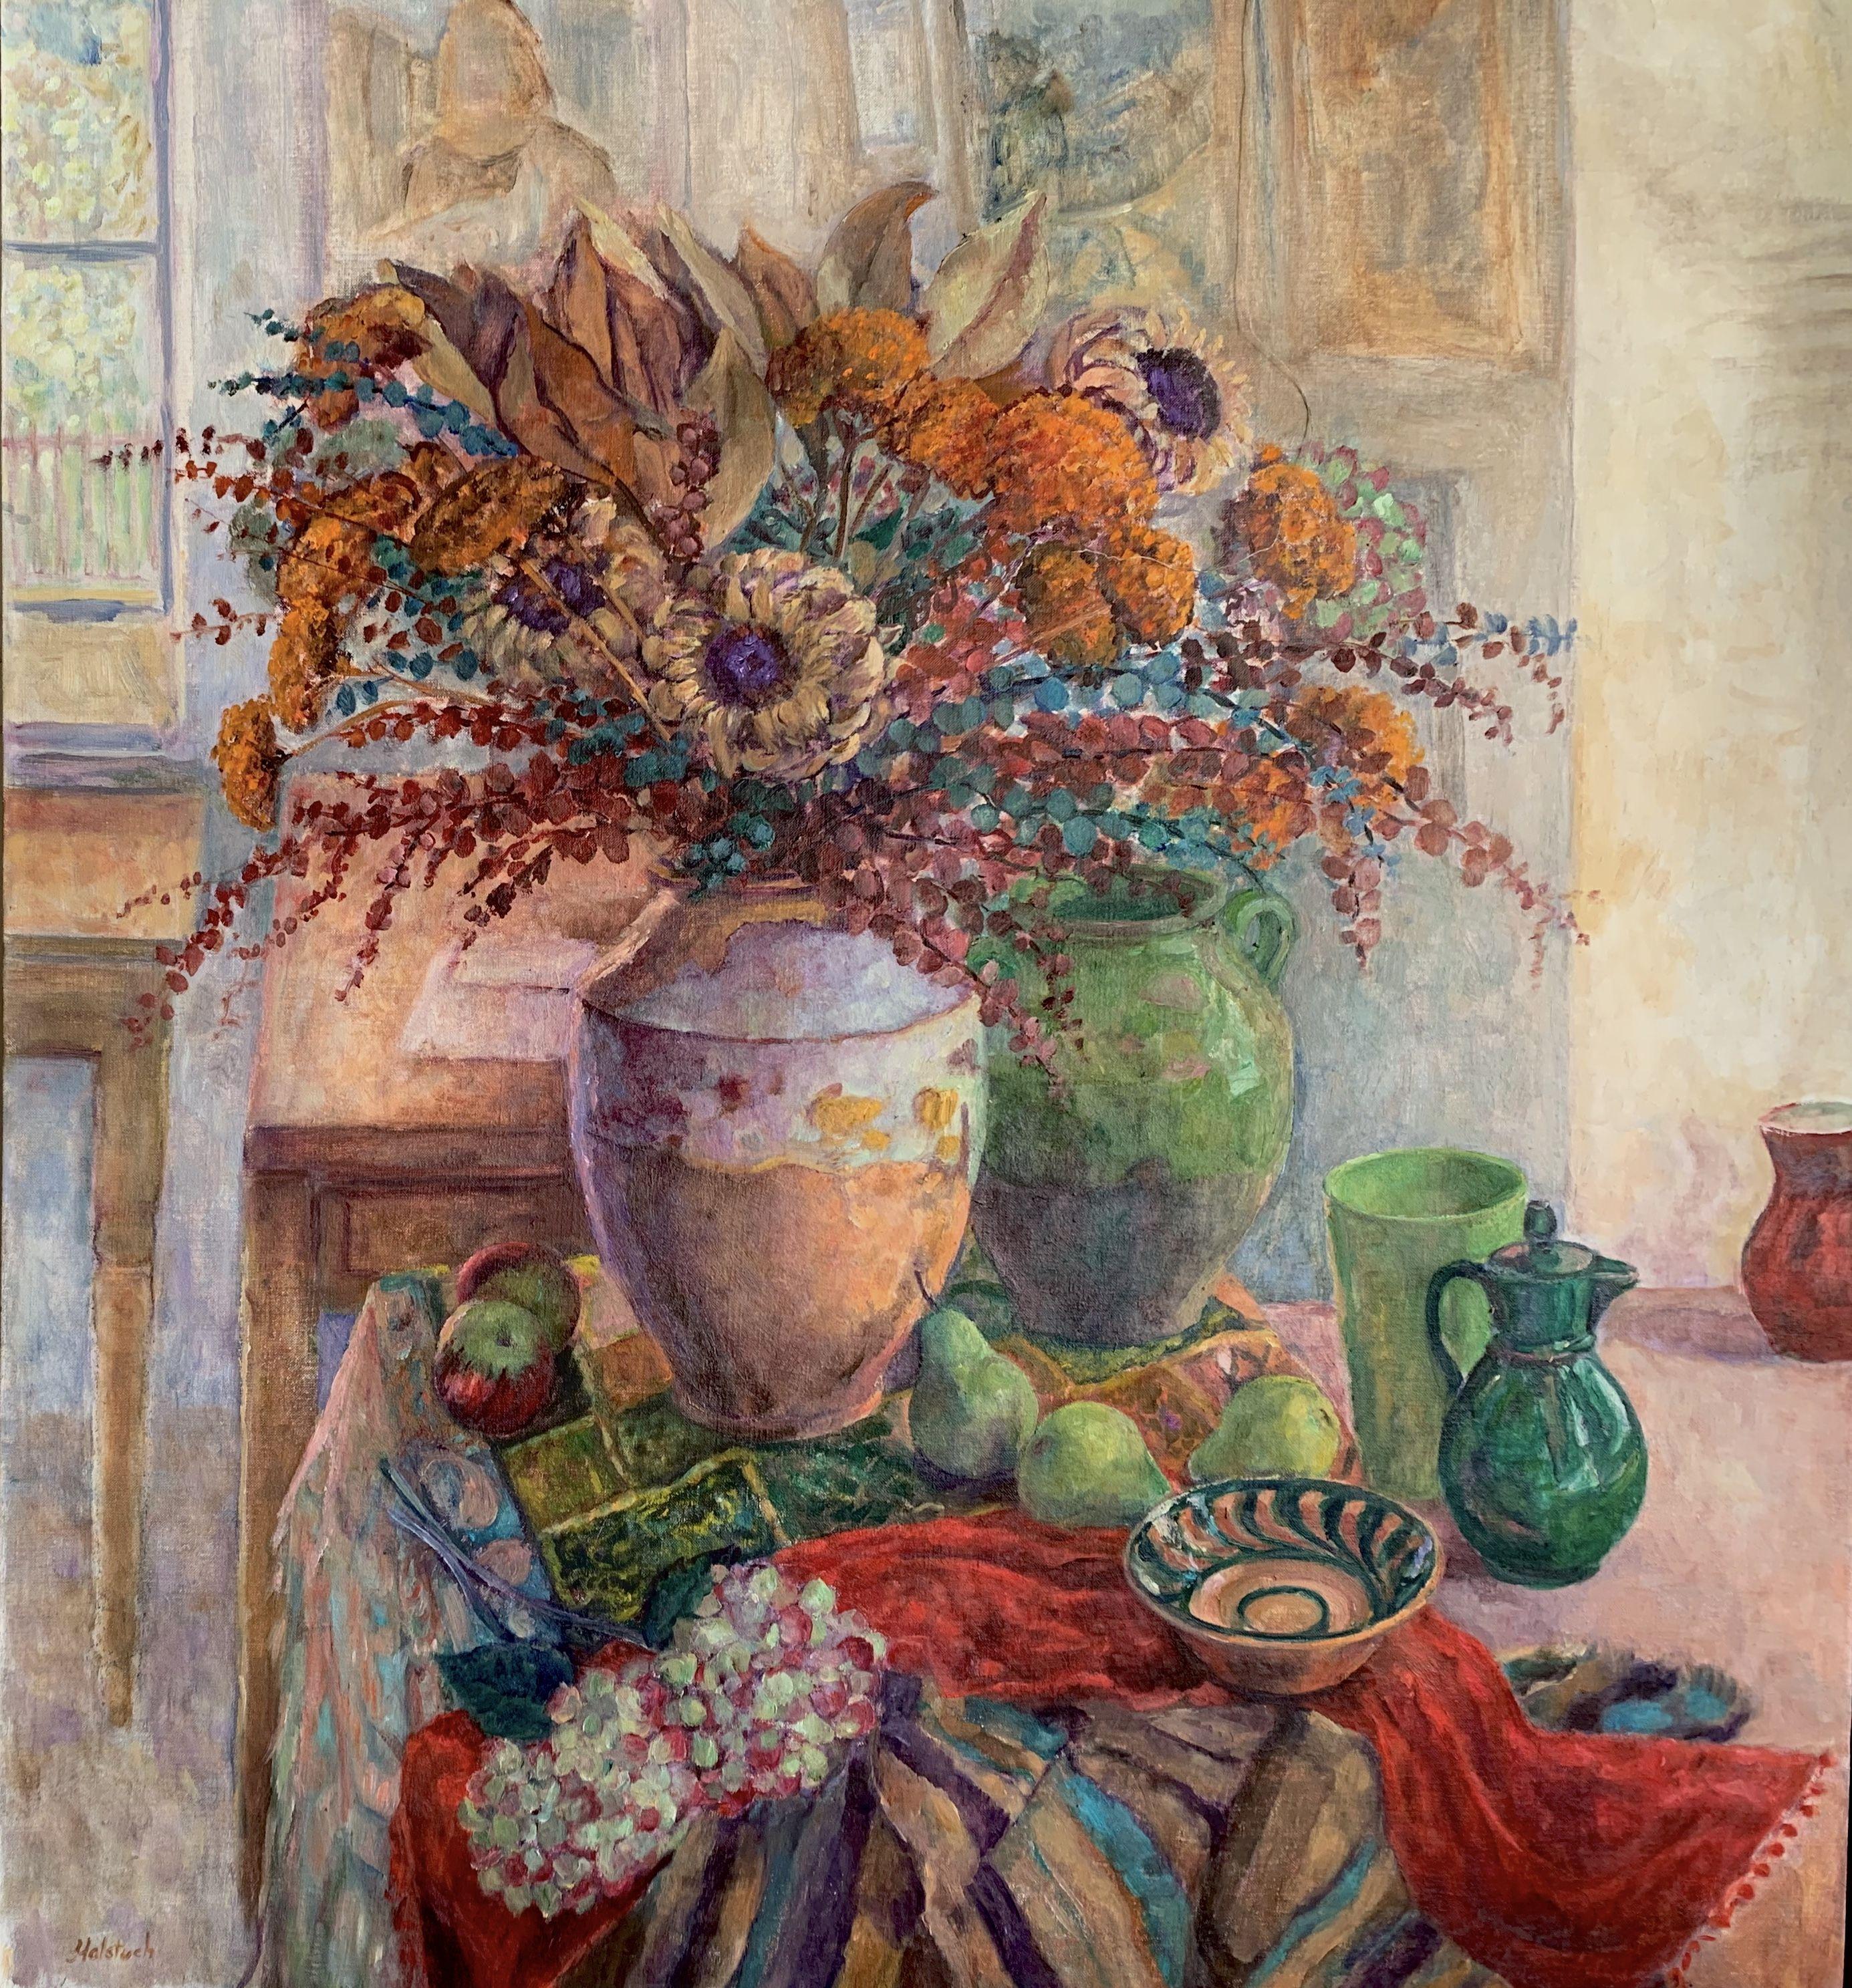   This still life features an old French earthenware pot filled with dried yarrow, eucalyptus, magnolia and artichoke flowers.  The pot is surrounded  with colorful pottery and a red scarf is draped over the table..  :: Painting :: Impressionist ::